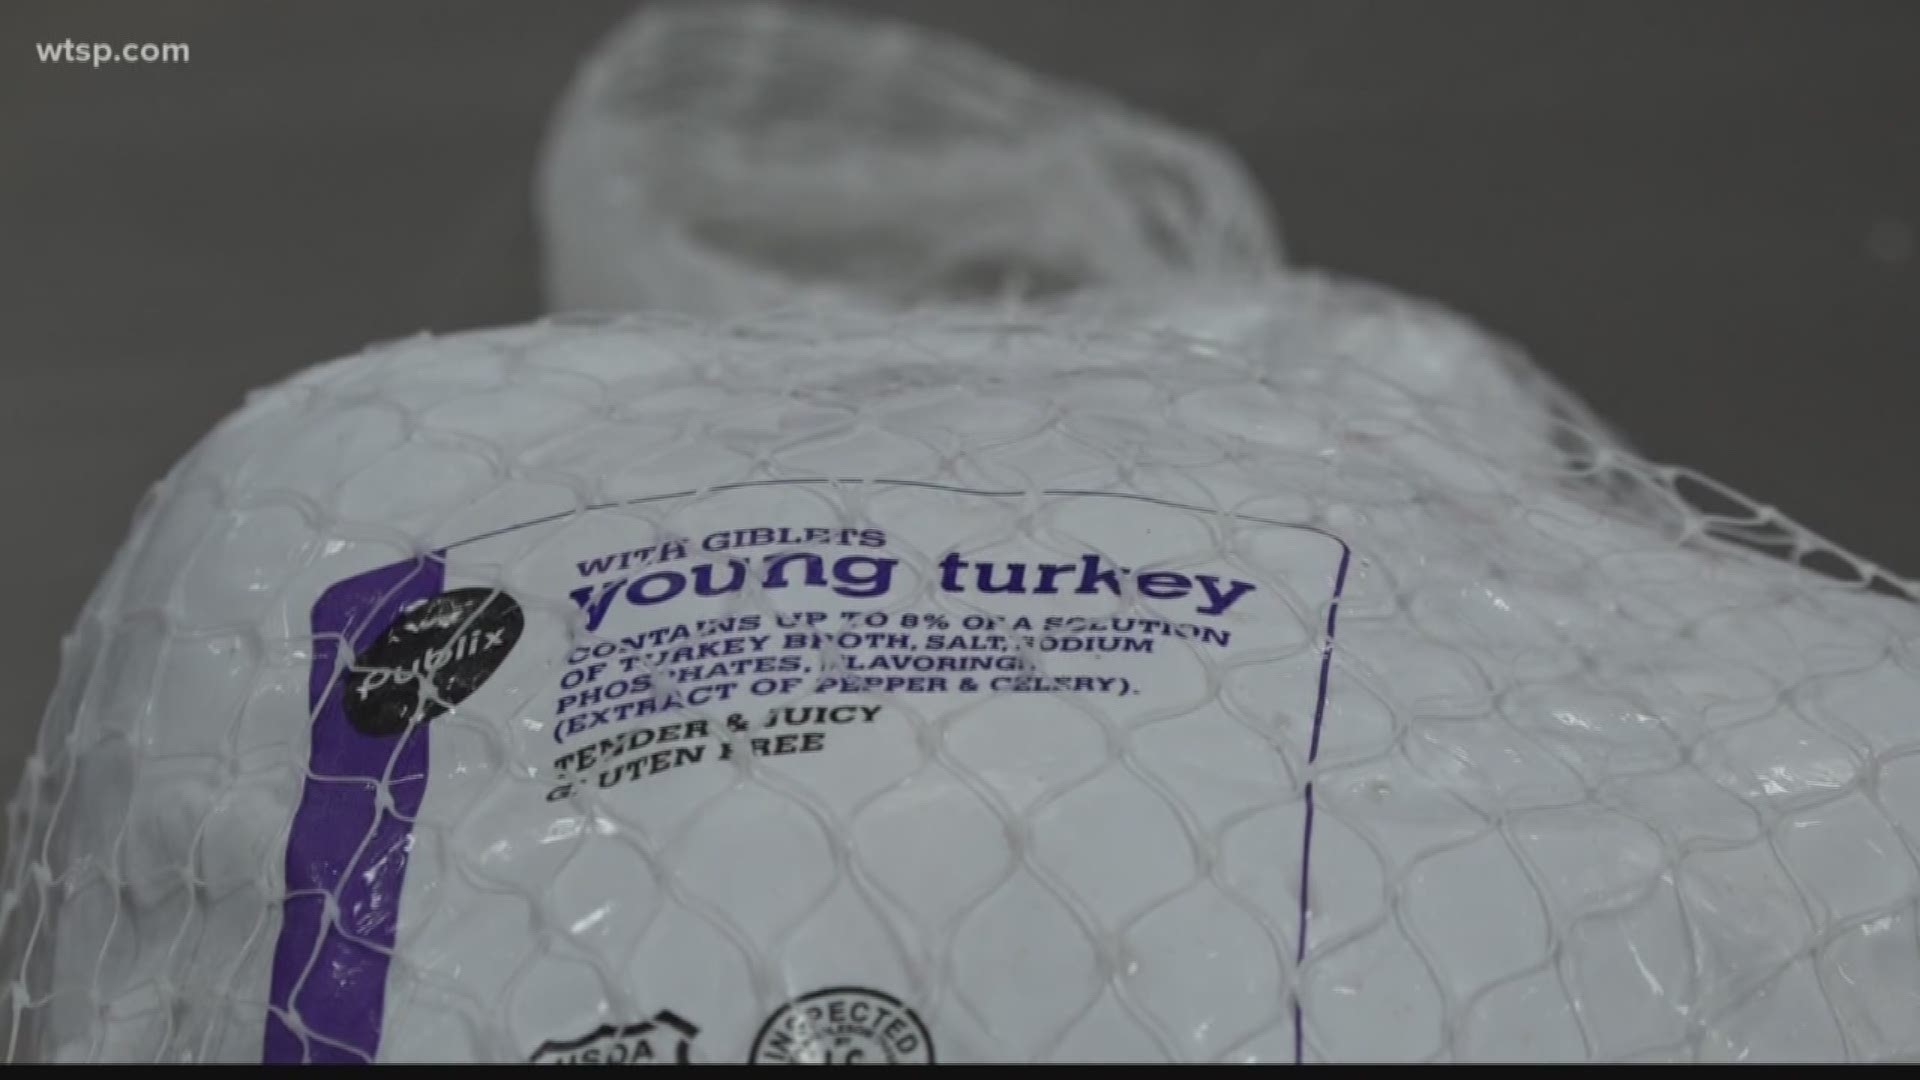 10News reporter Jenny Dean has more on how to safely prepare your holiday meals.